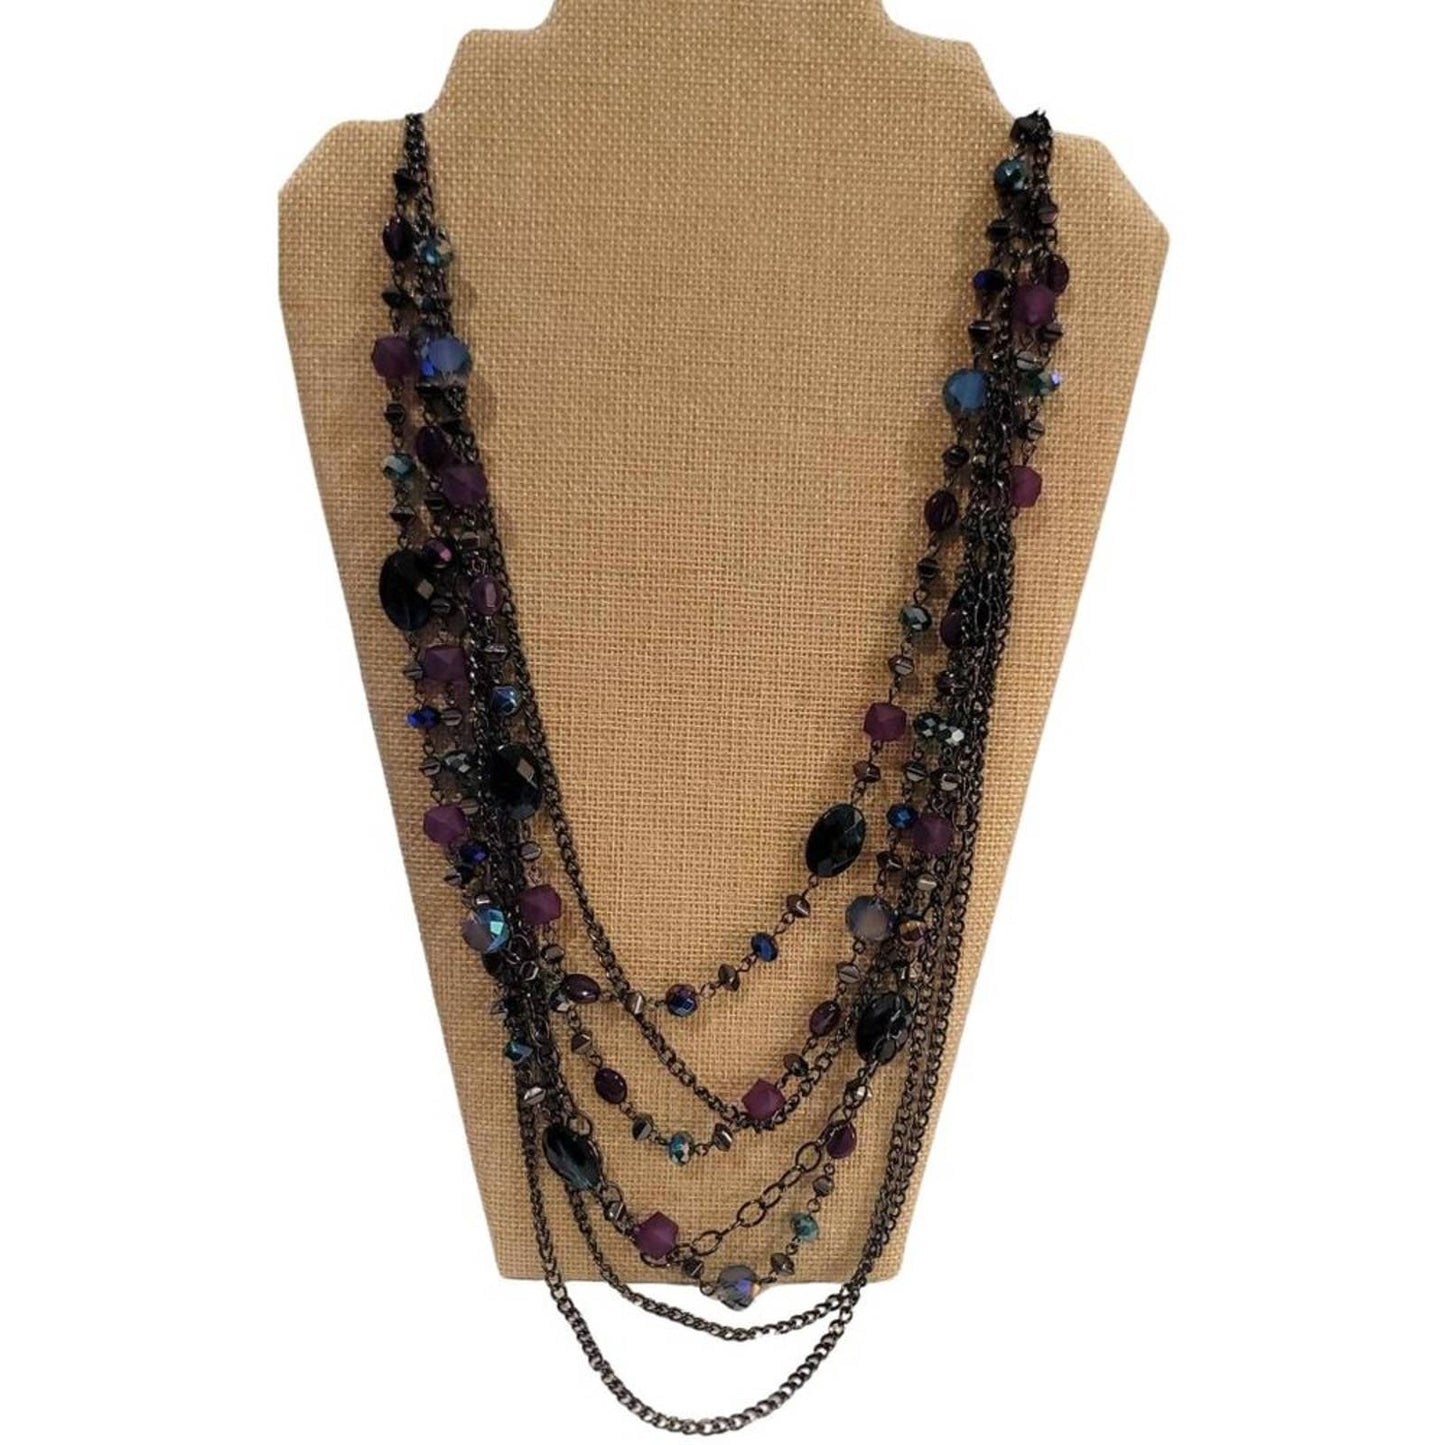 Indie Soleil Multi Chain Necklace NWT